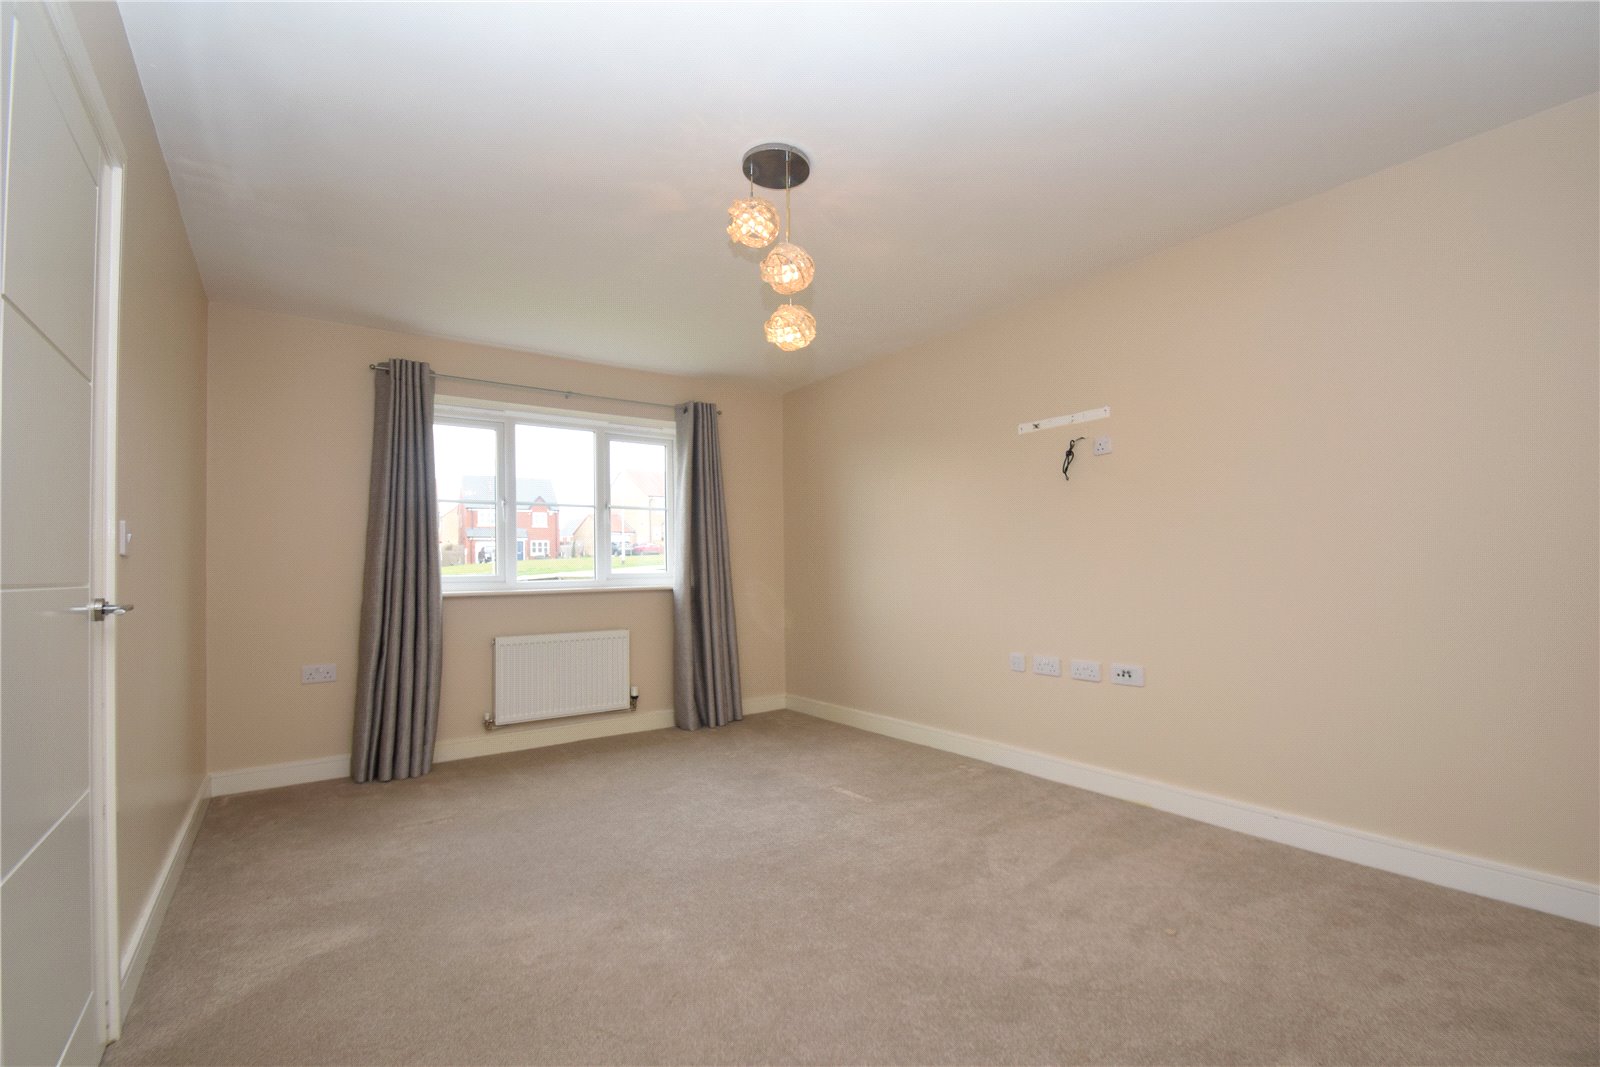 4 bed house for sale in Badger Lane, Middle Deepdale  - Property Image 2